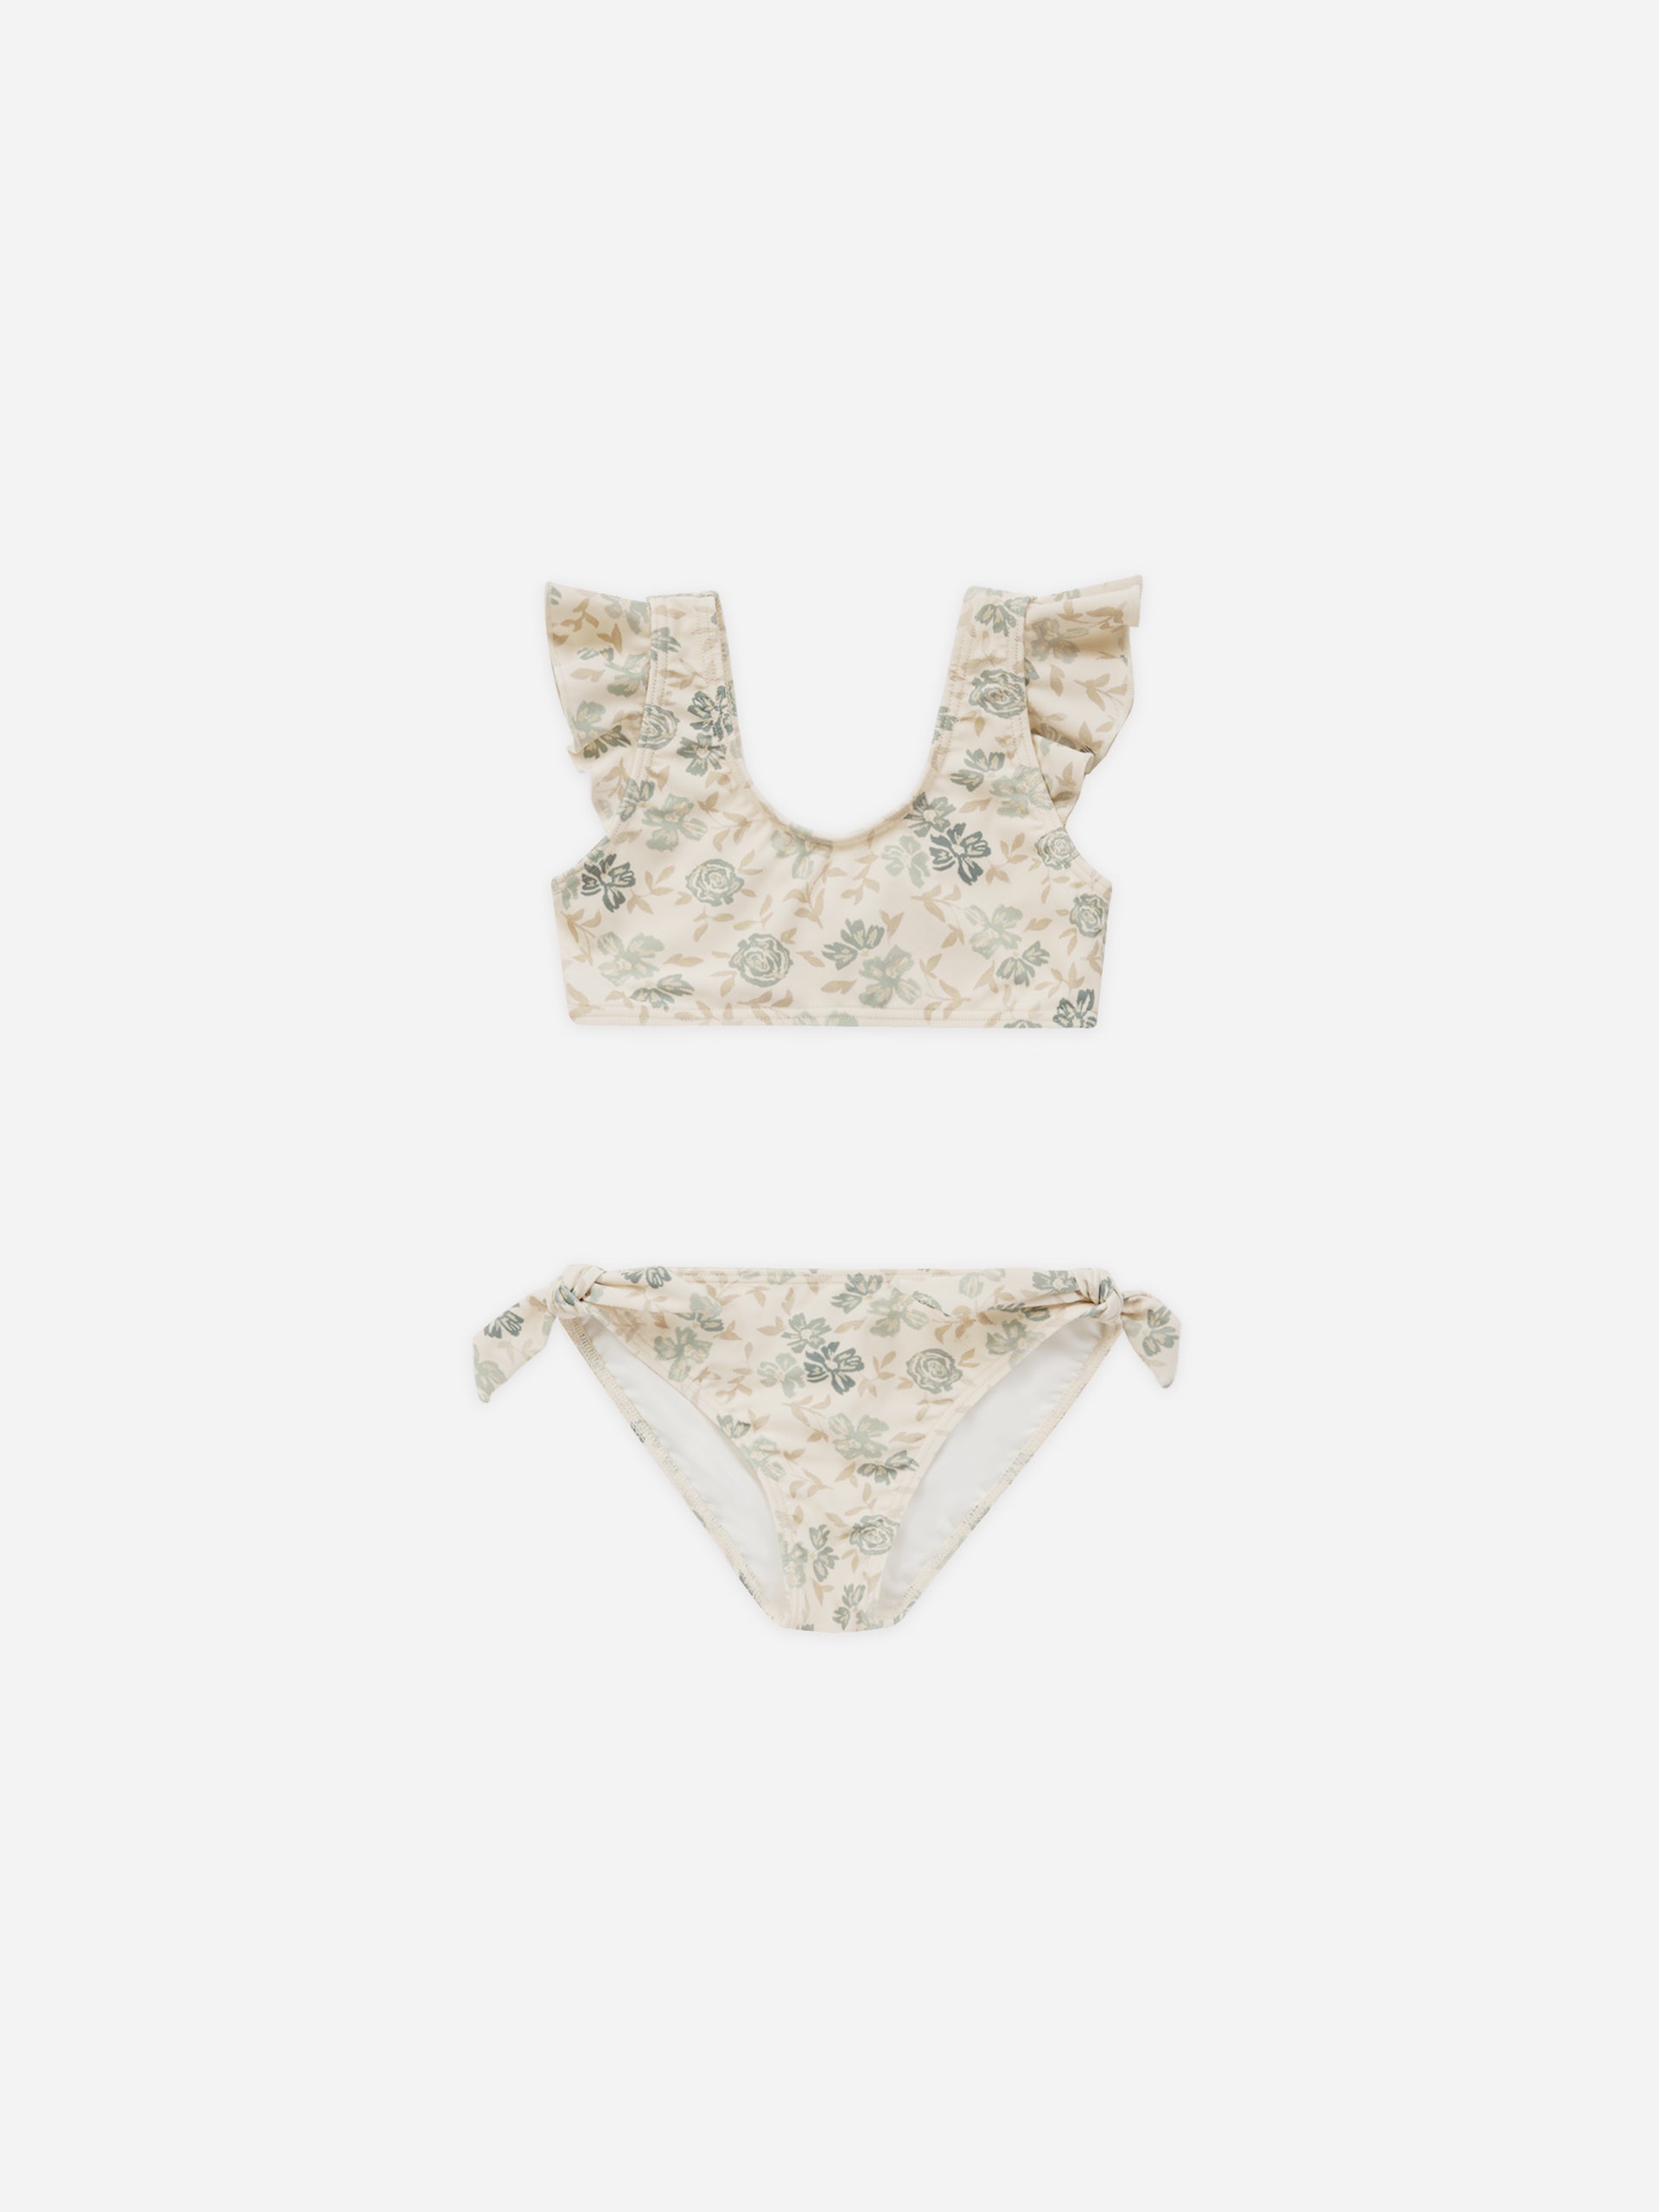 Ojai Bikini || Blue Floral - Rylee + Cru | Kids Clothes | Trendy Baby Clothes | Modern Infant Outfits |